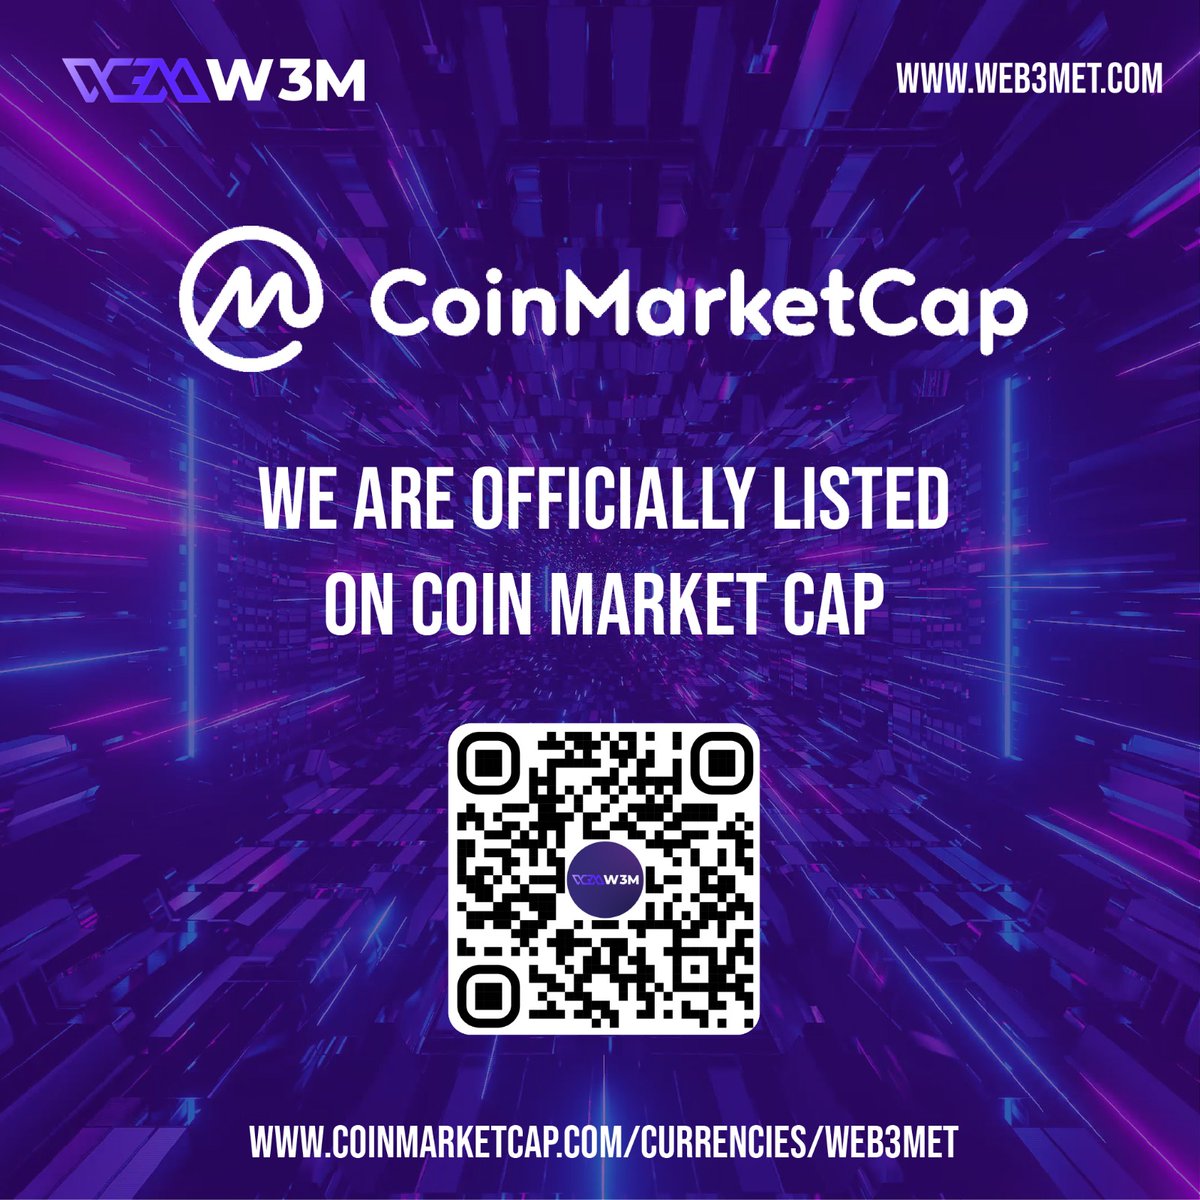 WE ARE OFFICIALLY LISTED ON COIN MARKET CAP